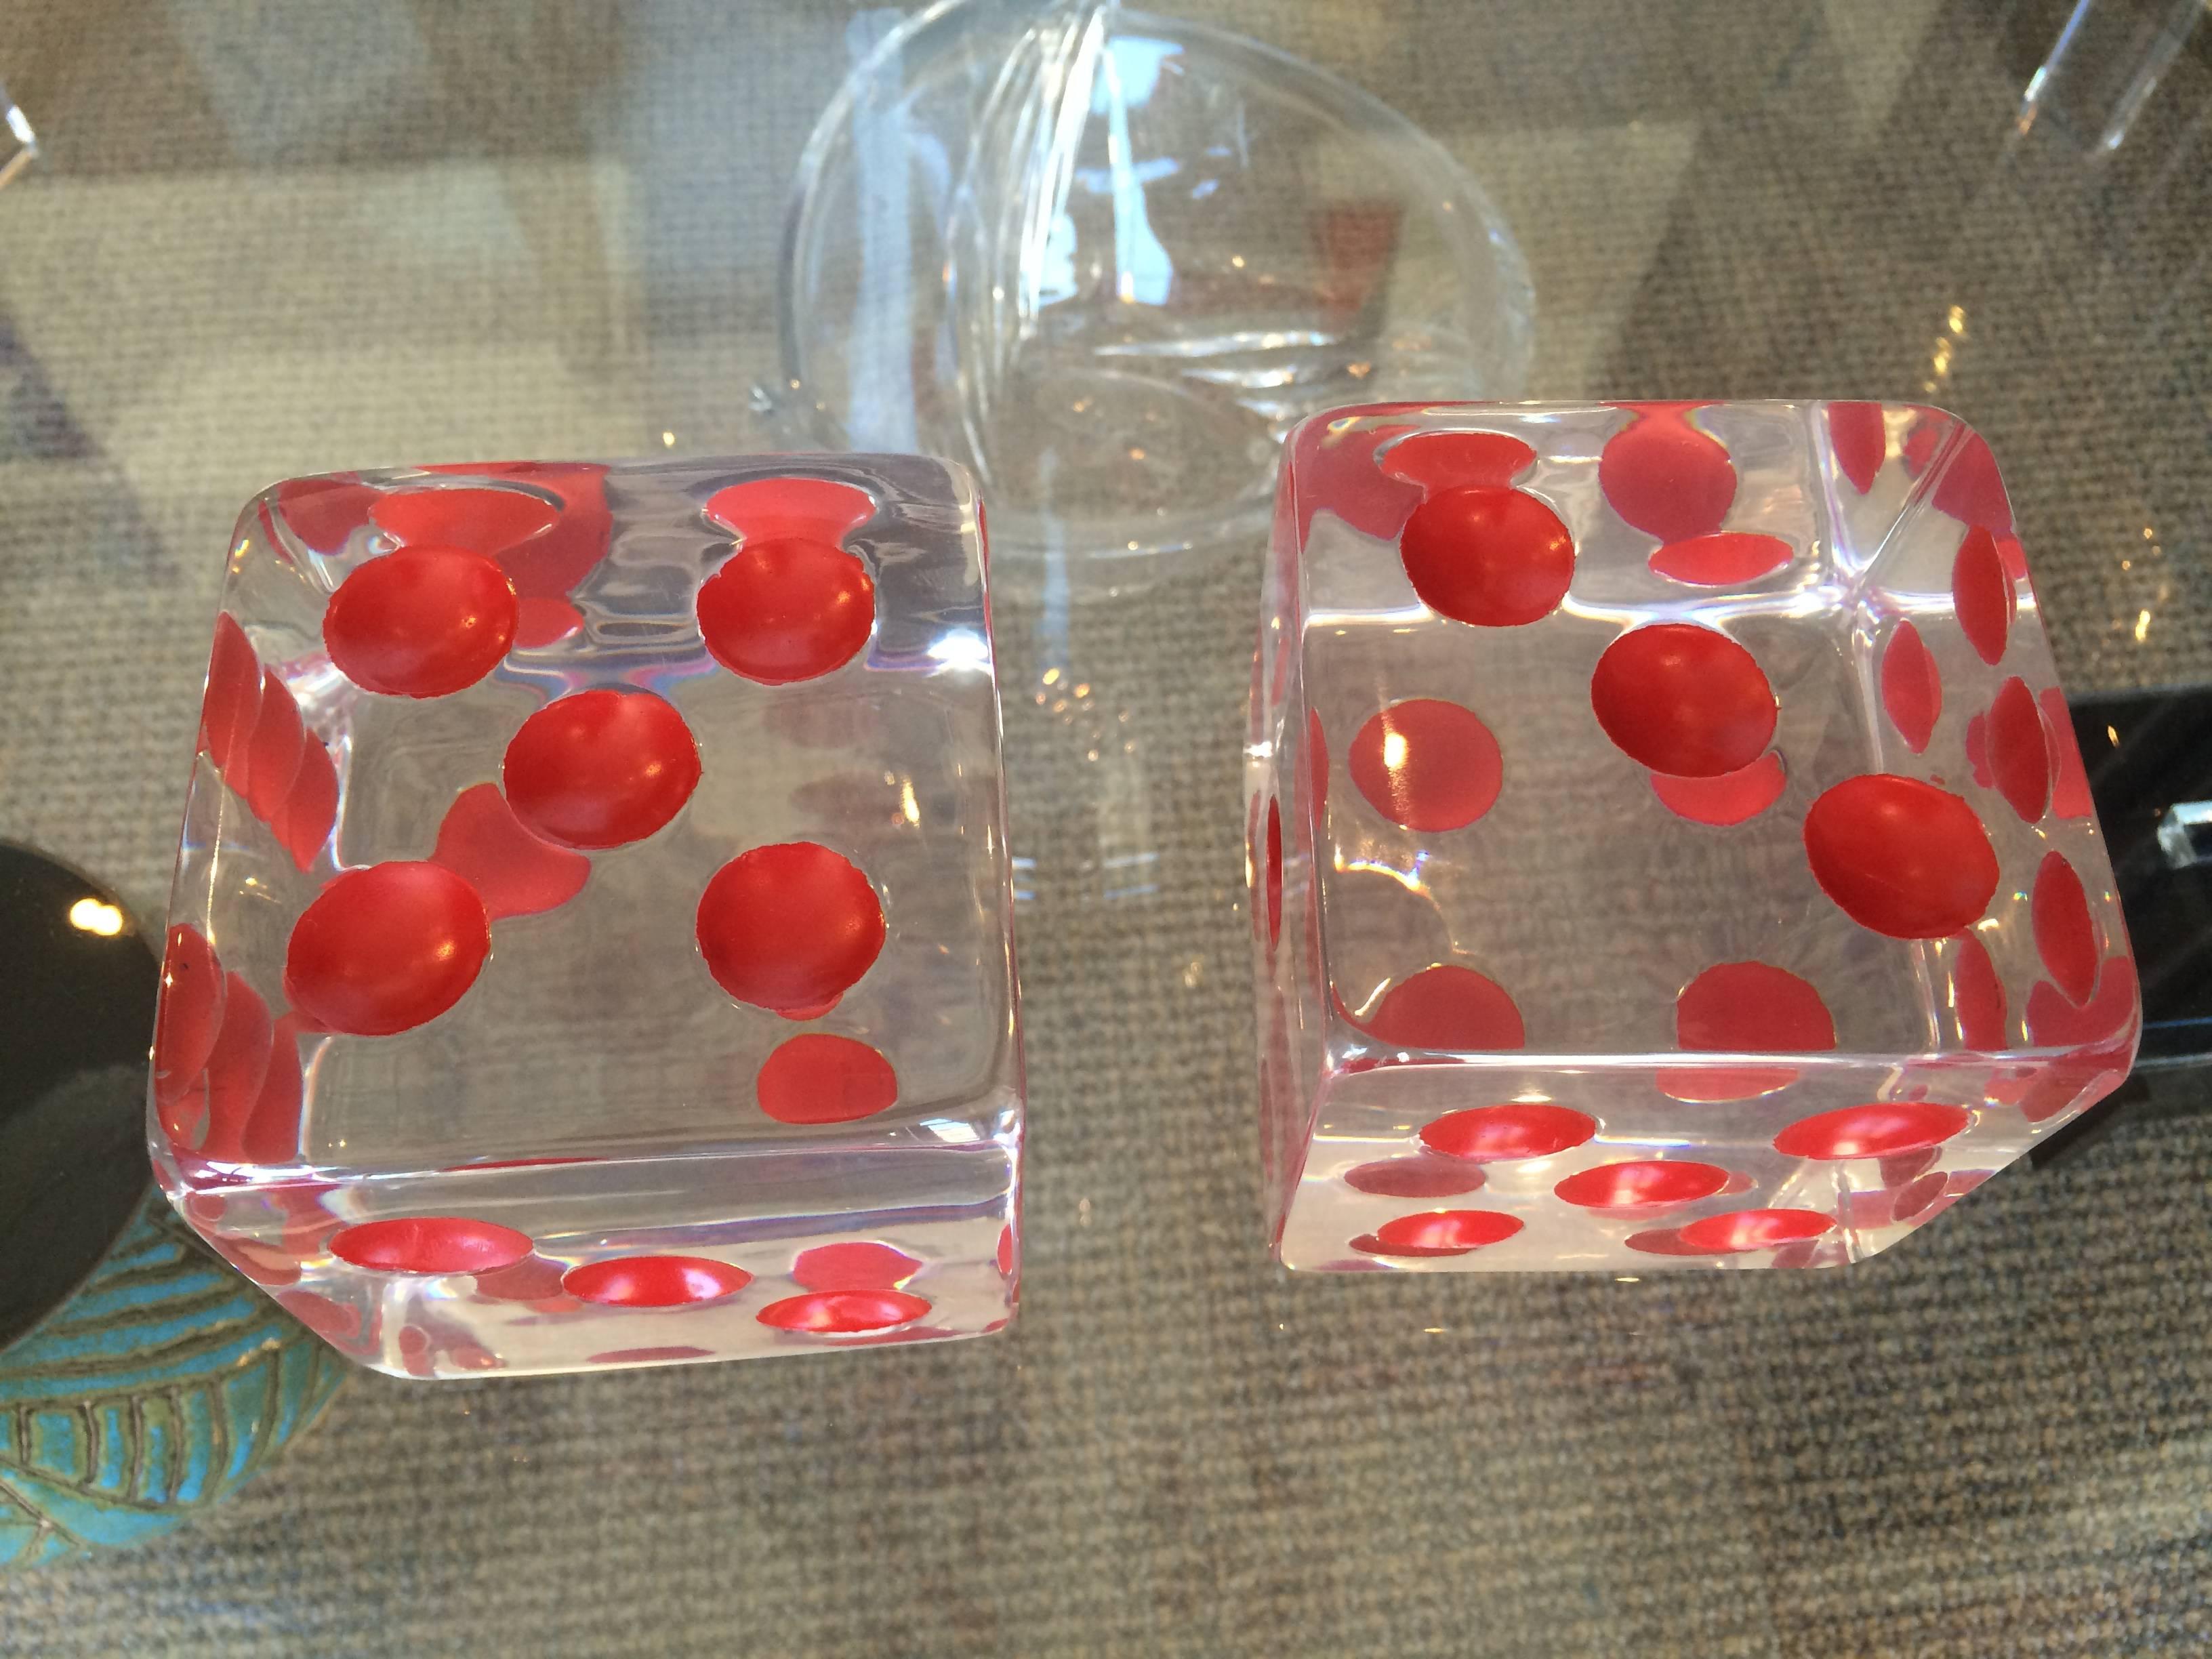 American Oversized Dice Sculpture with Red Dots by Charles Hollis Jones